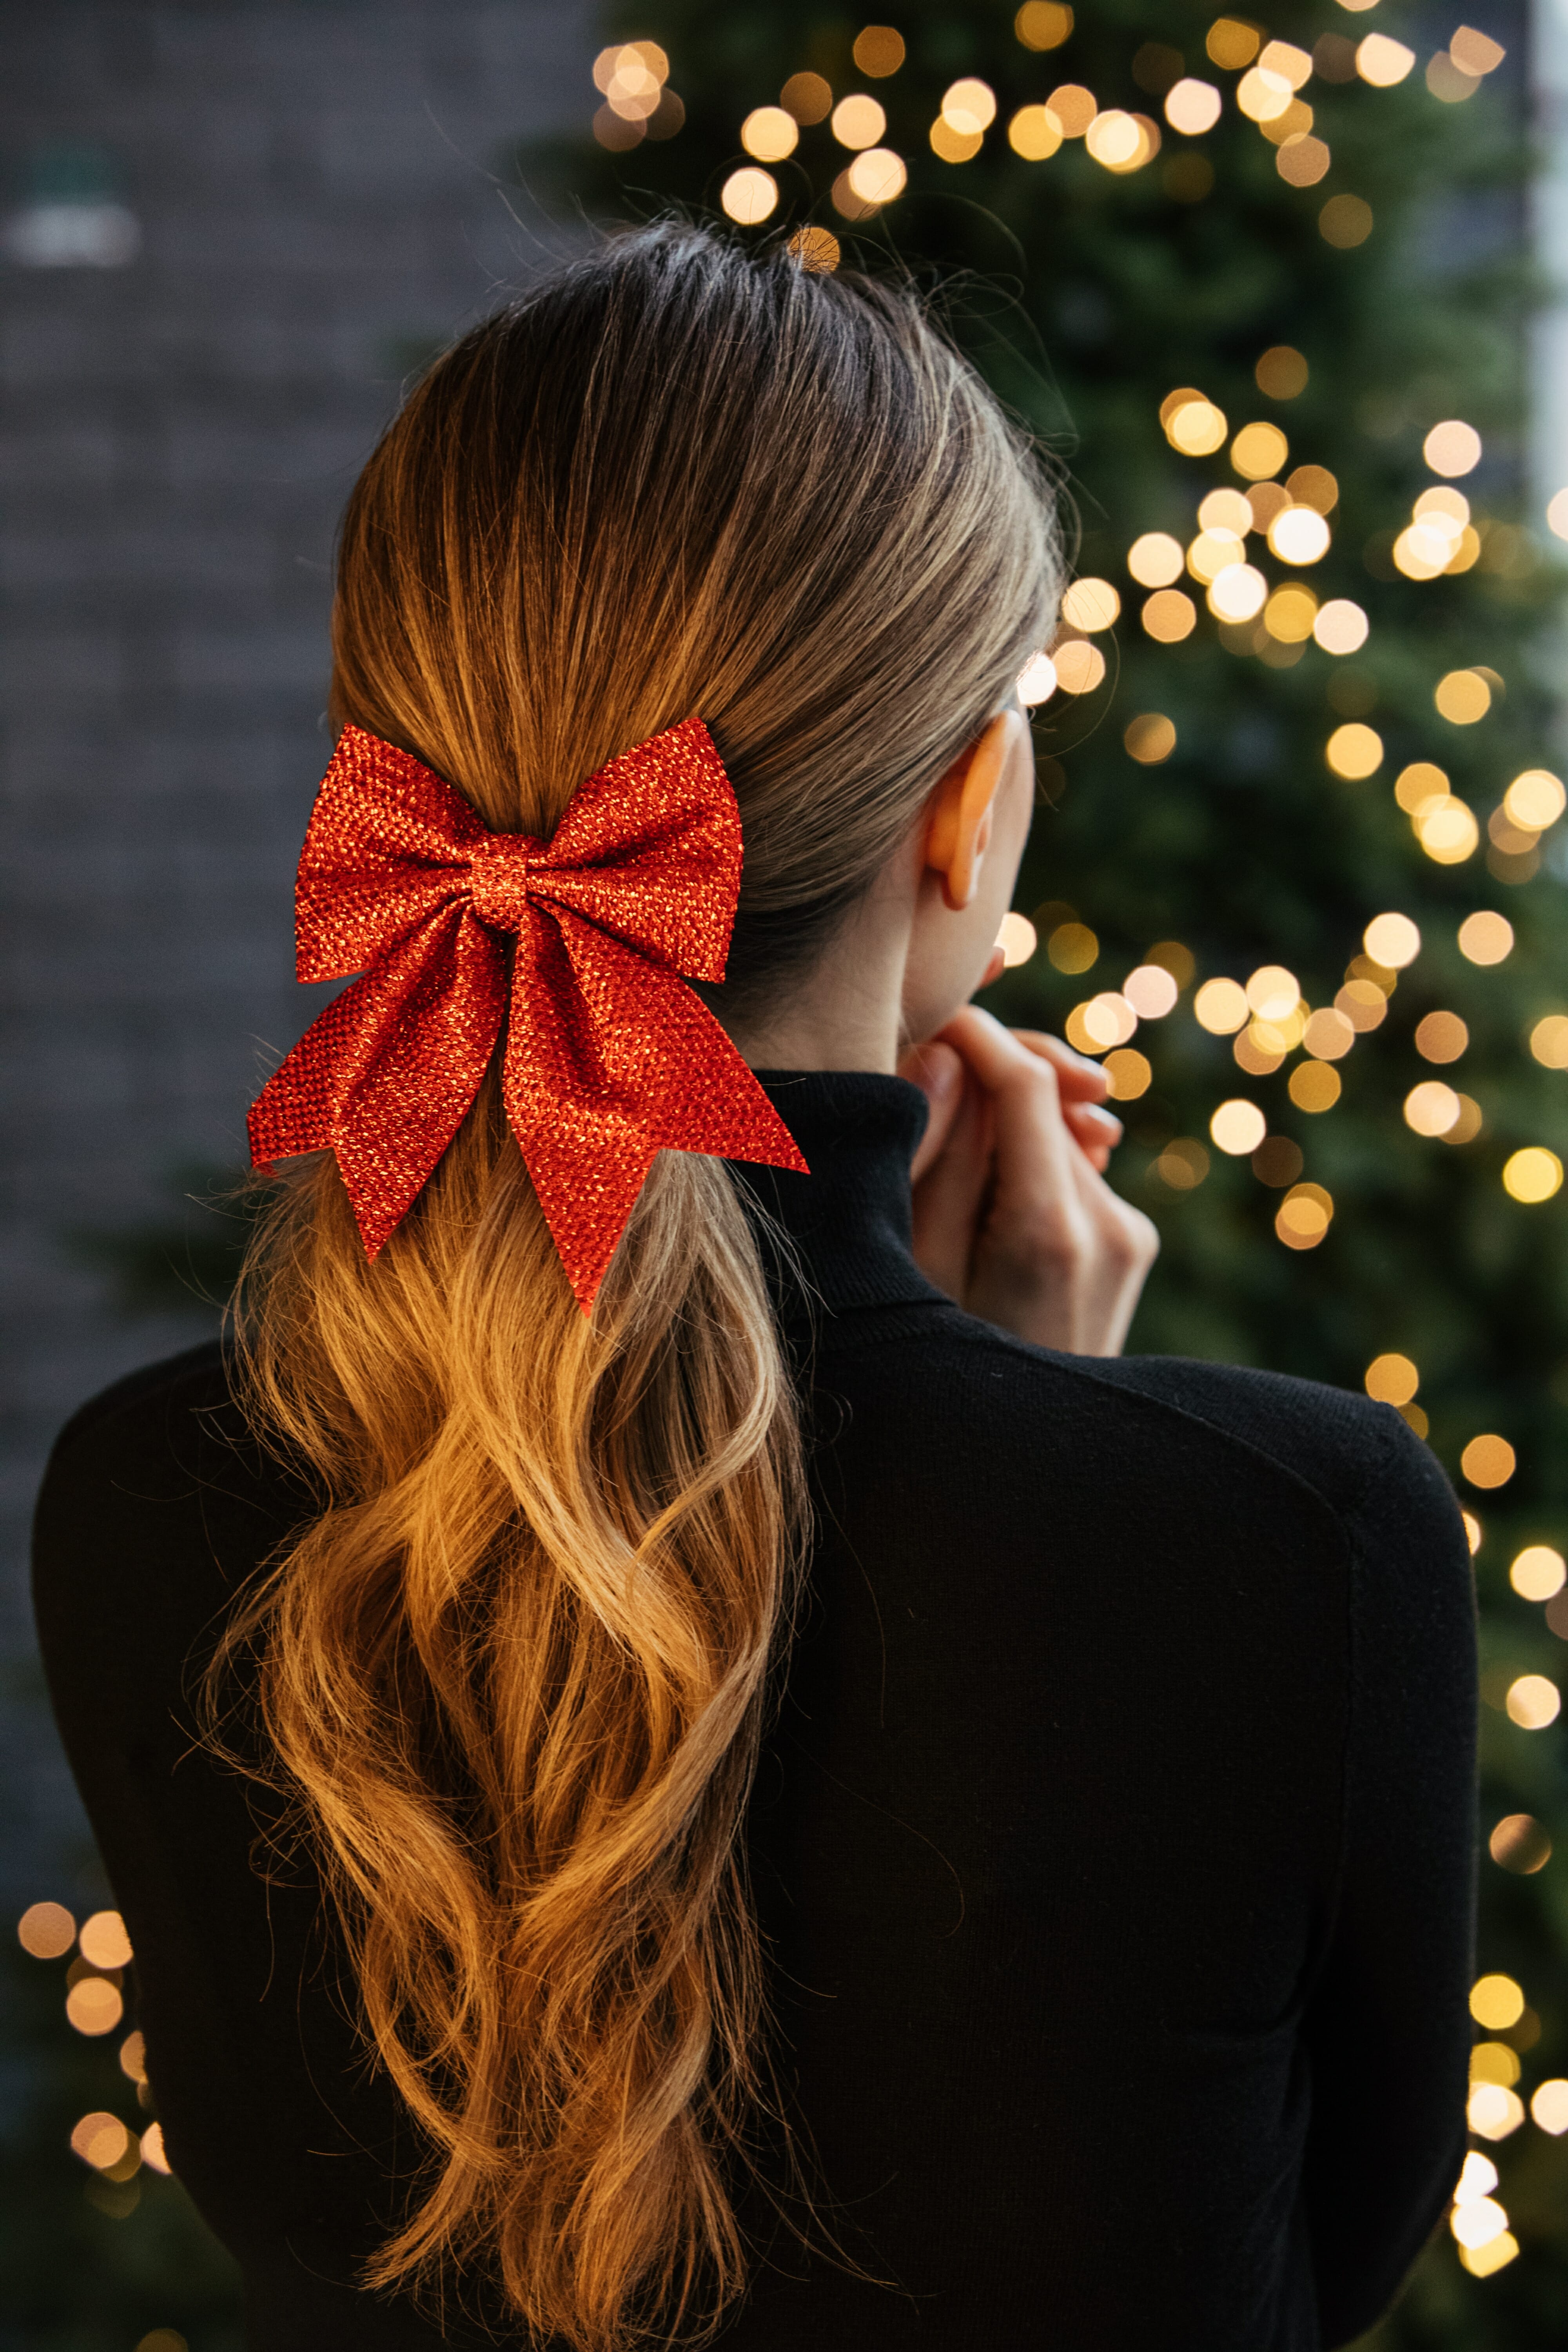 Girl with long blonde hair and red bow hair